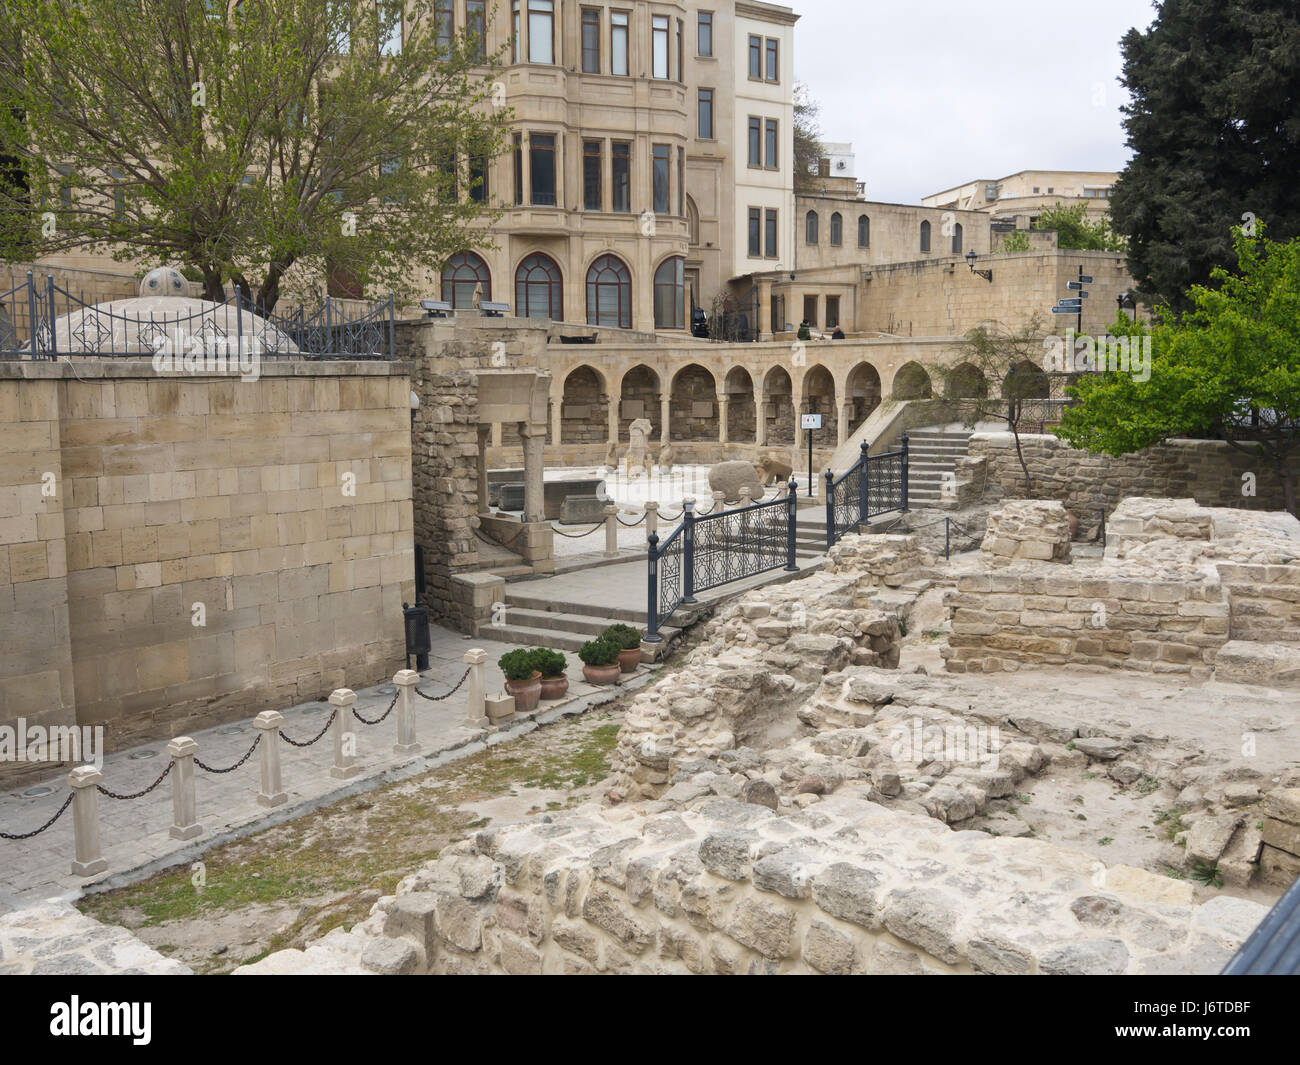 Baku old town, Icheri sheher, inner city surrounded by fortification walls, Unesco World heritage site, pedestrian walkway through old remains Stock Photo